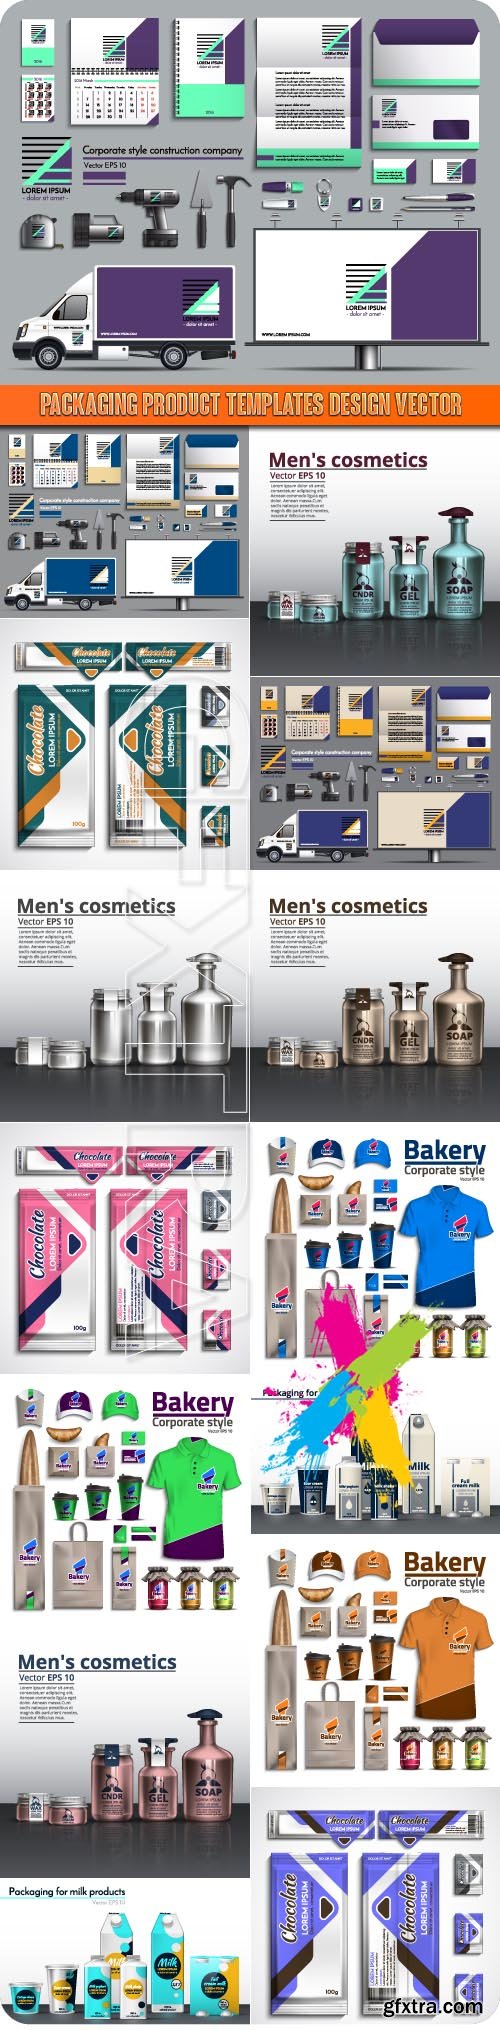 Packaging product templates design vector